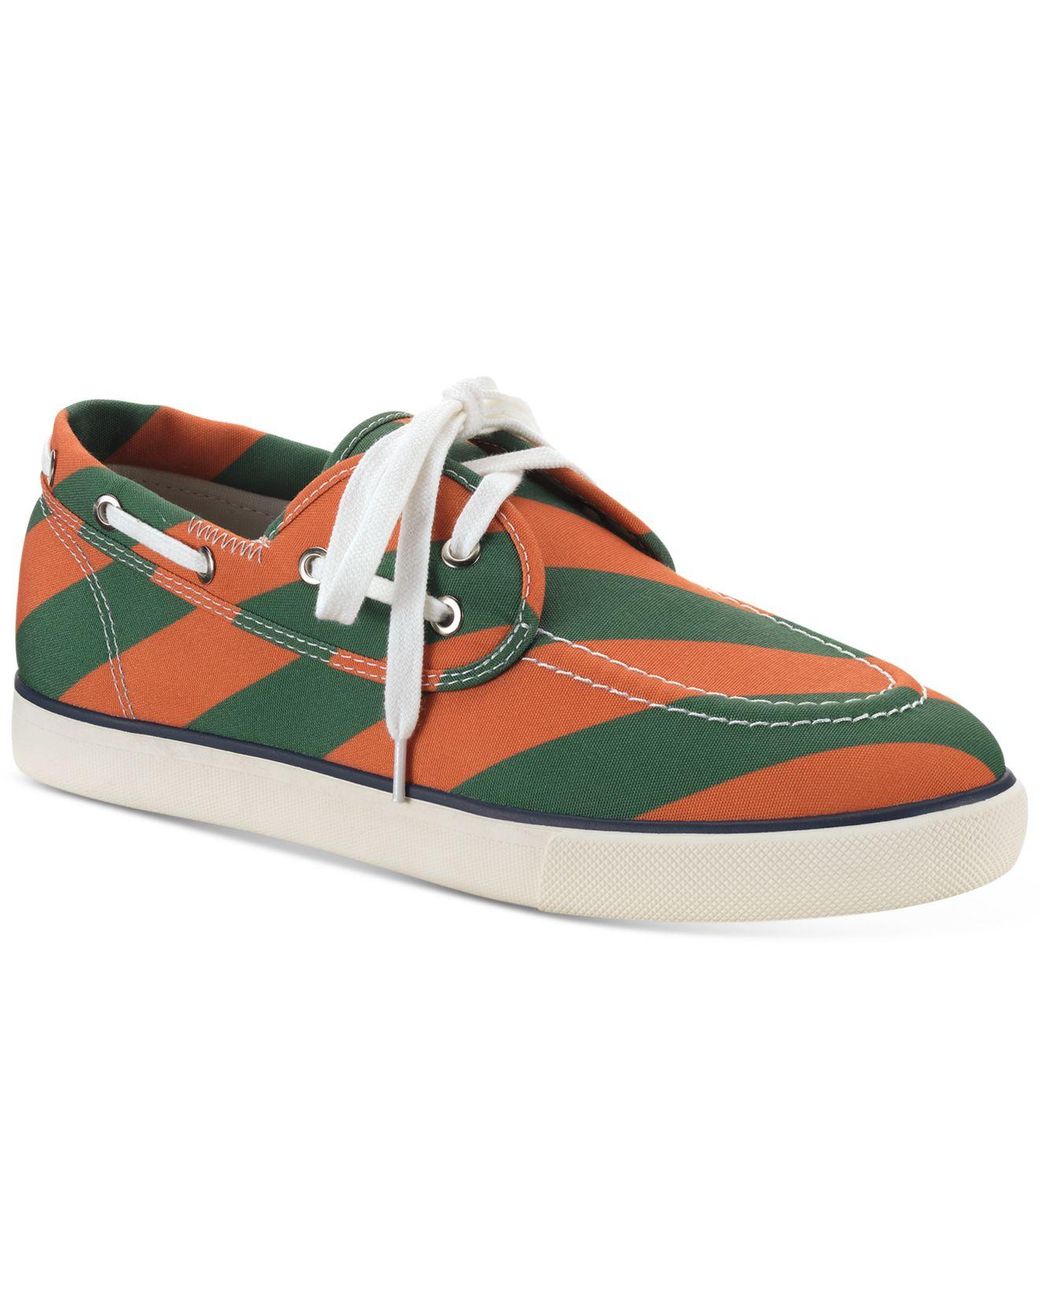 Club Room Cotton Royce Boat Shoe, Created For Macy's in Green/Orange ...